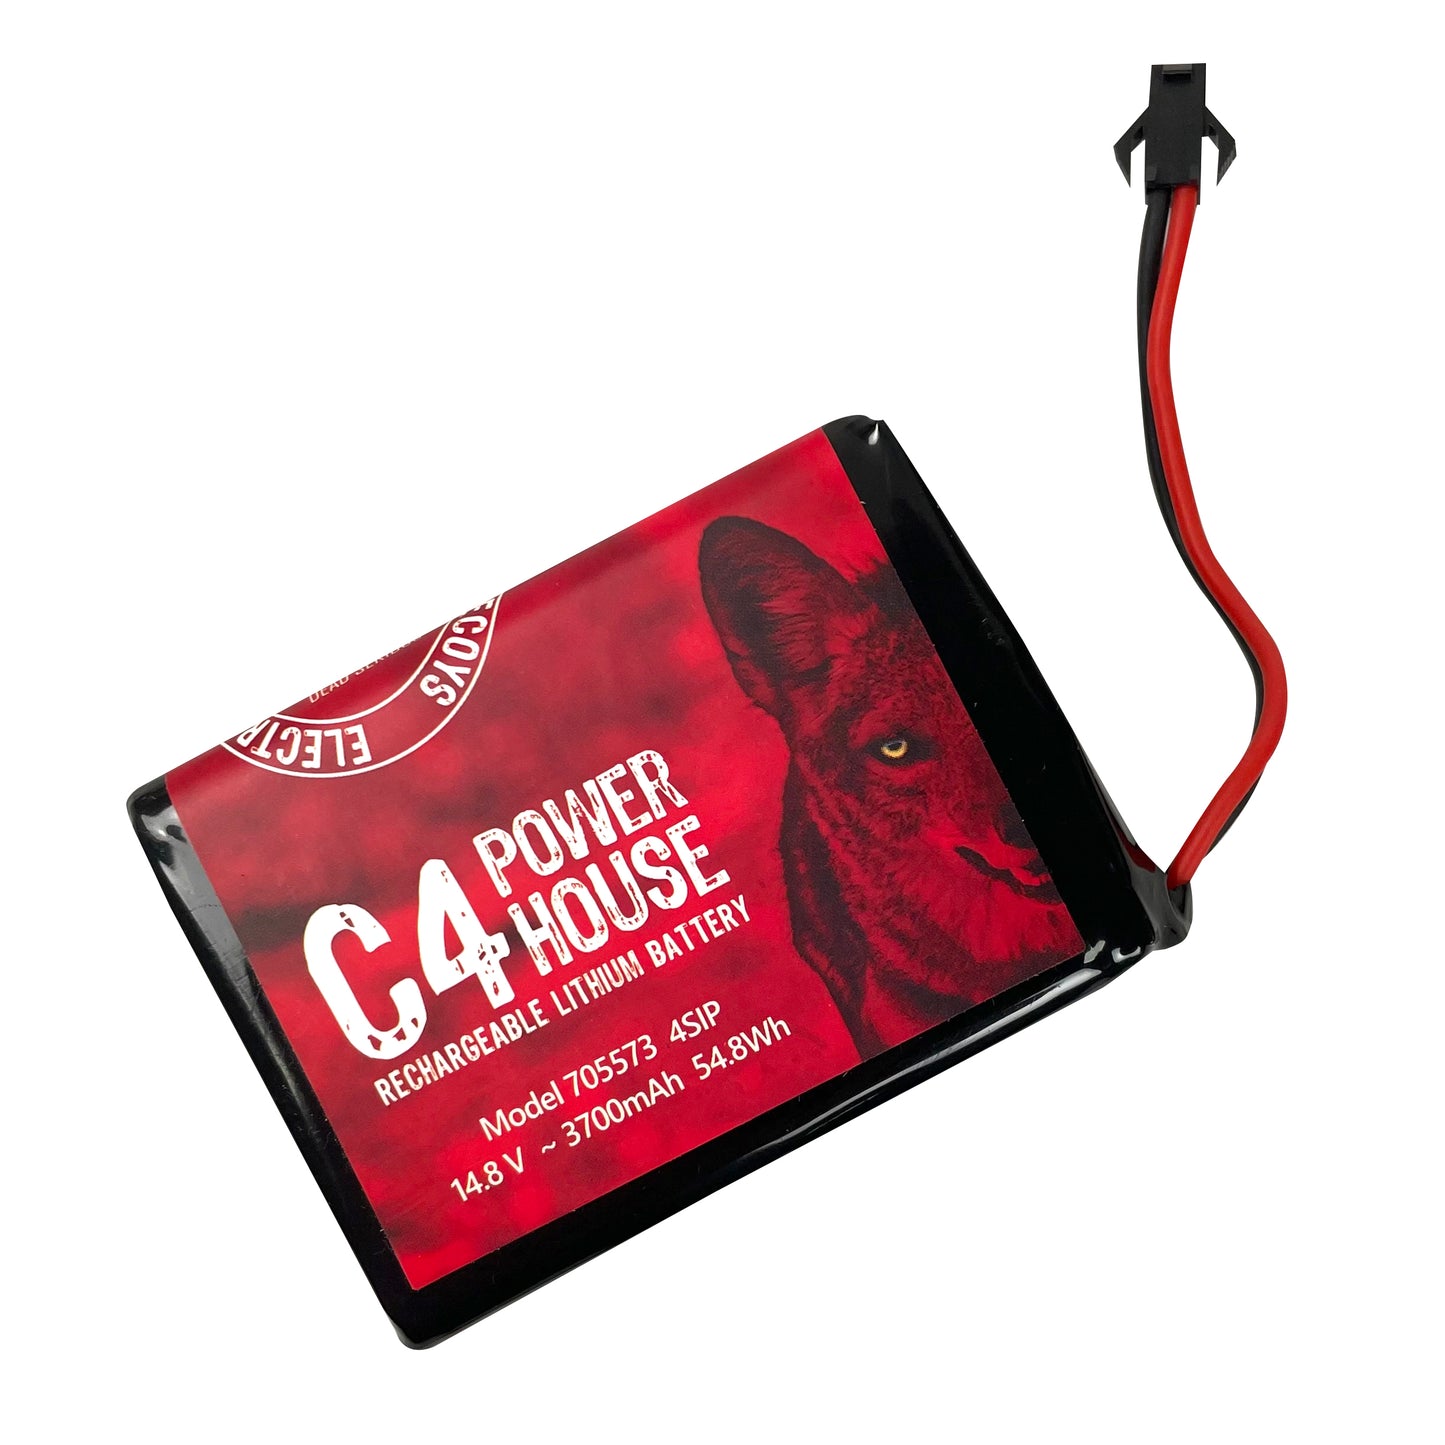 C4 Power House Rechargeable Lithium Battery ONLY